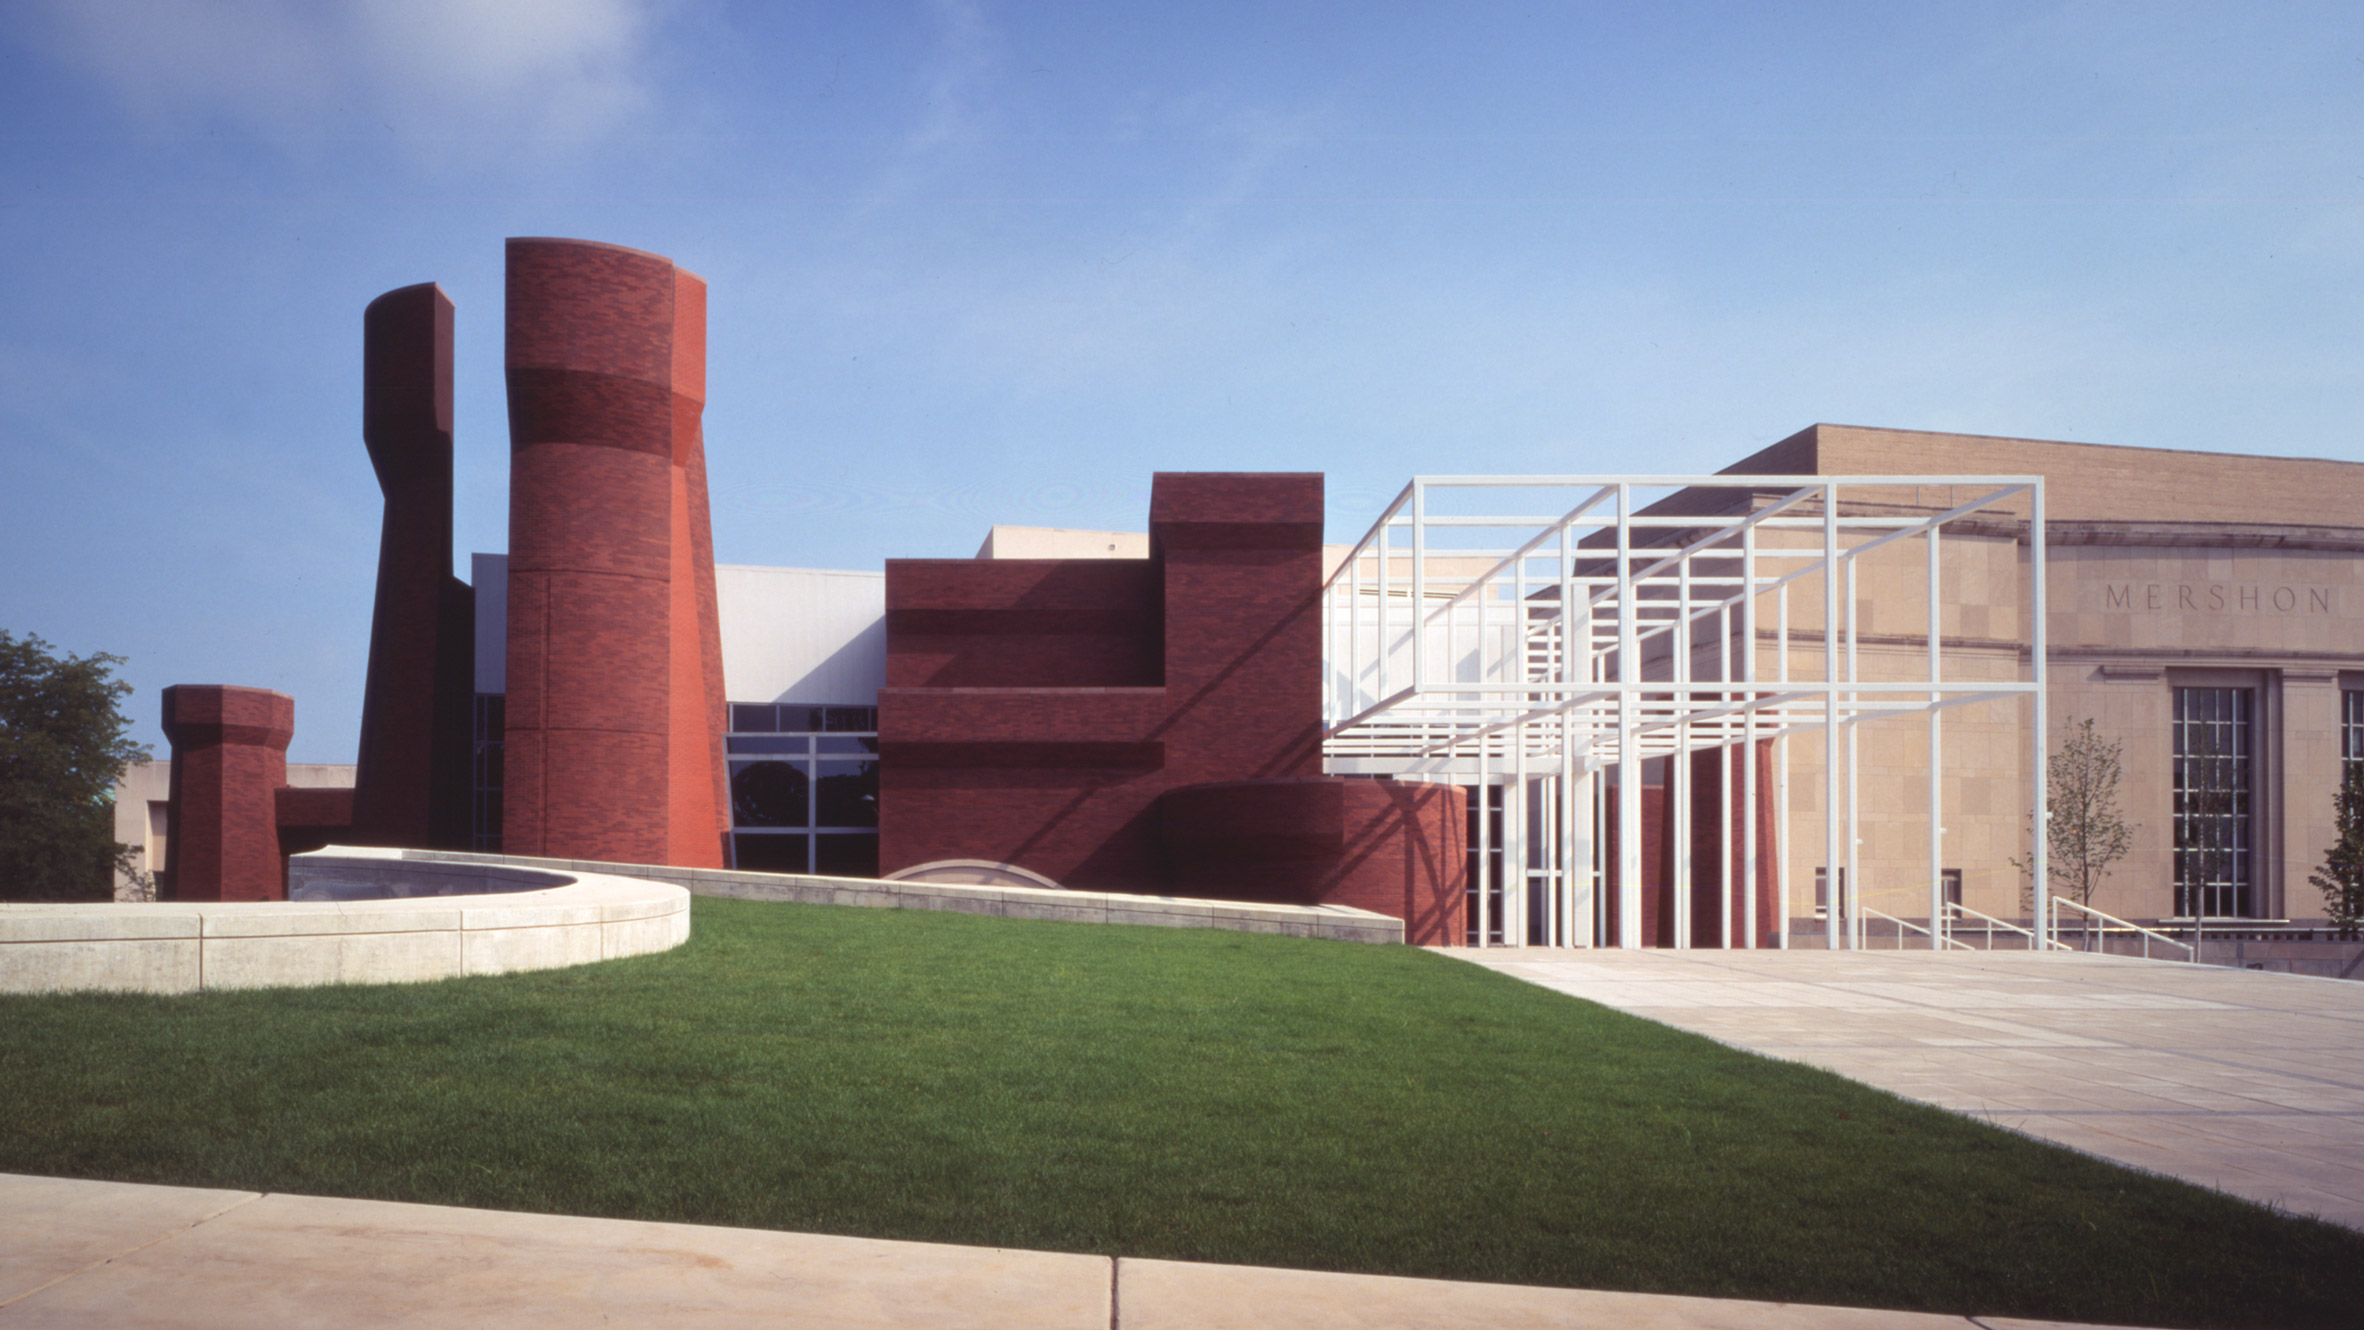 Image of the front of the Wexner Center for the Arts